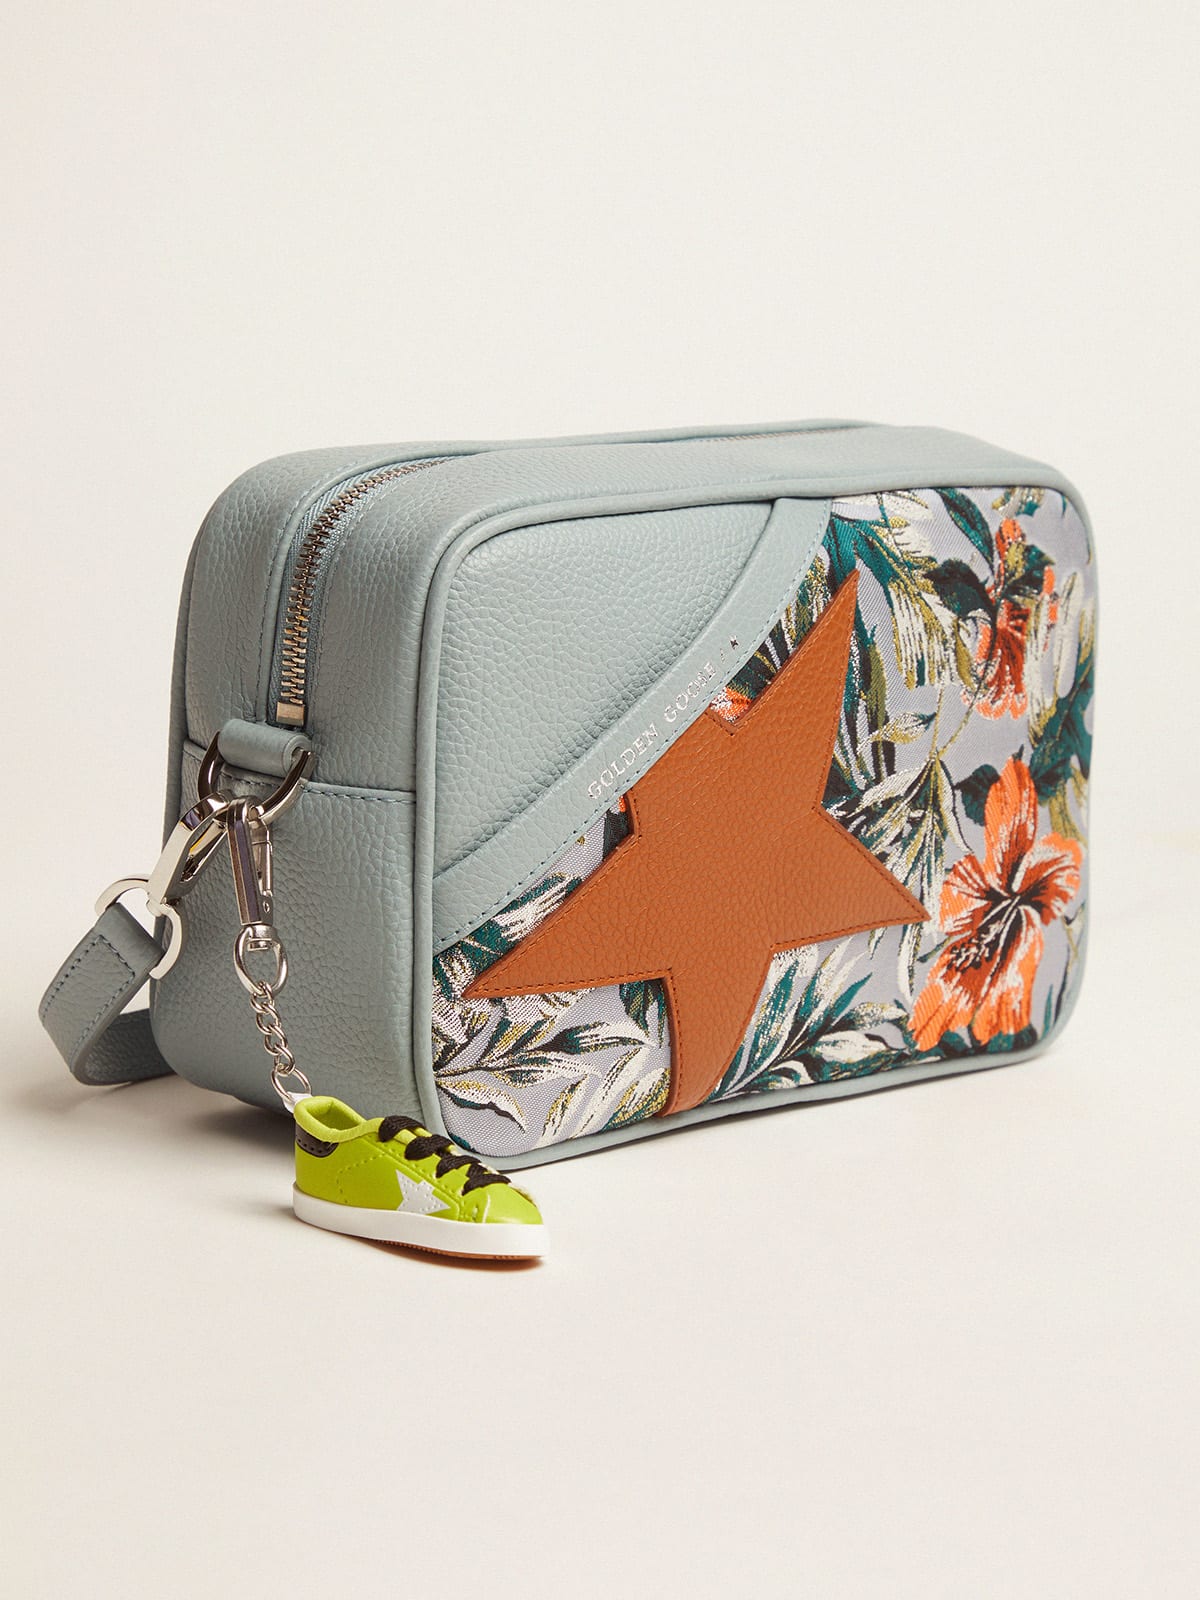 Golden Goose - Celadon Star Bag in hammered leather with jacquard print and caramel-colored star in 